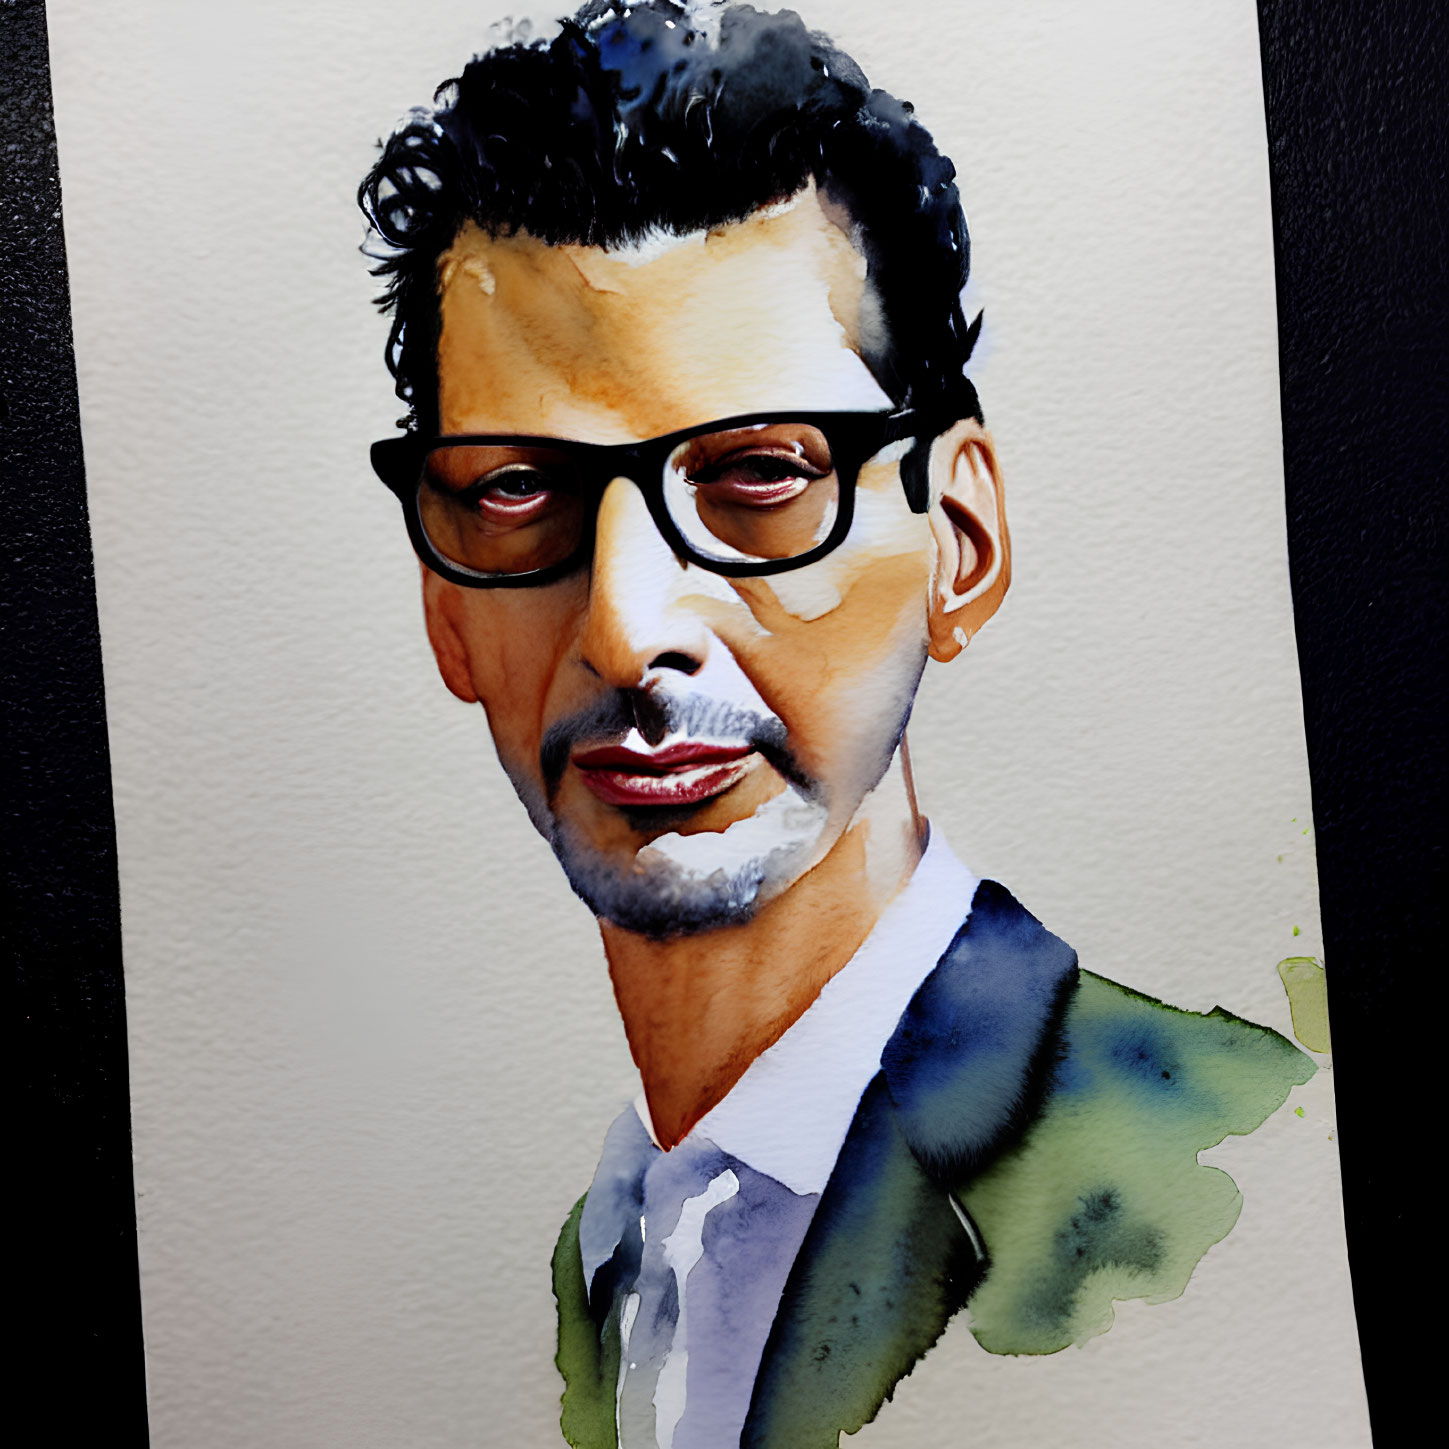 Expressive watercolor portrait of a man with glasses, mustache, and suit